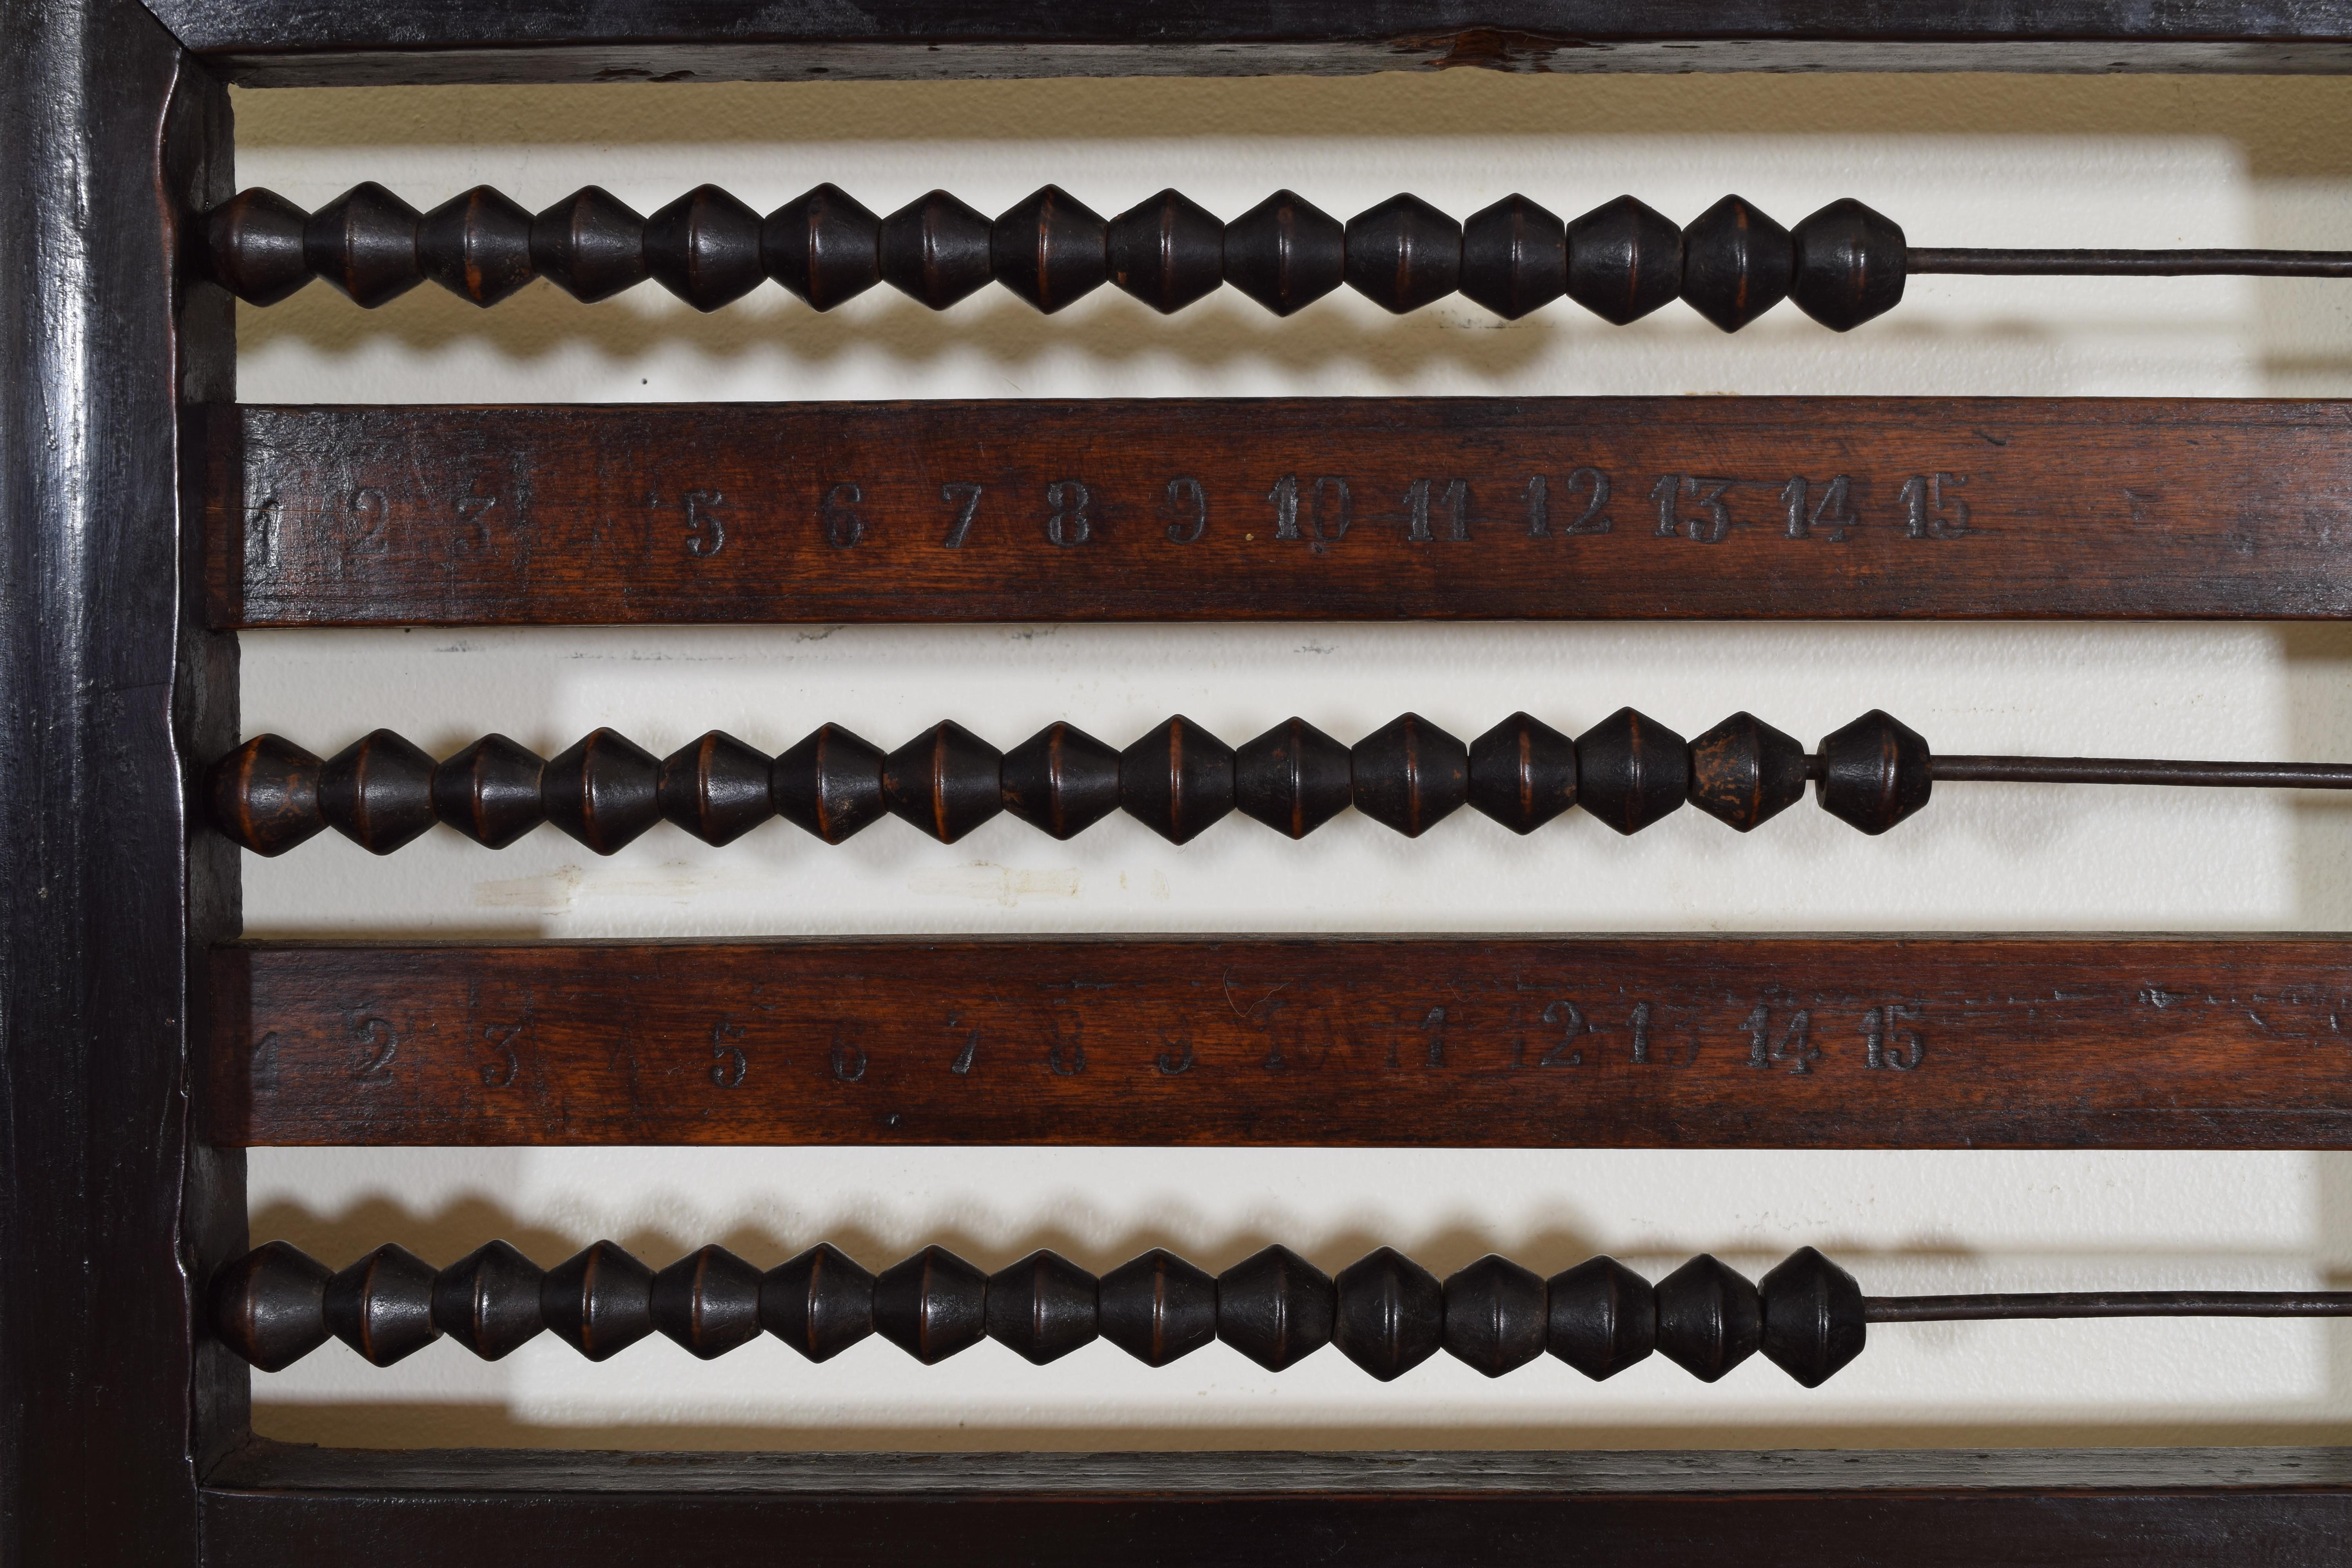 Having a molded edge frame of ebonized walnut, the upper portion a working three part abacus with engraved numbers, the lower section awaiting a mirrorplate of choice.